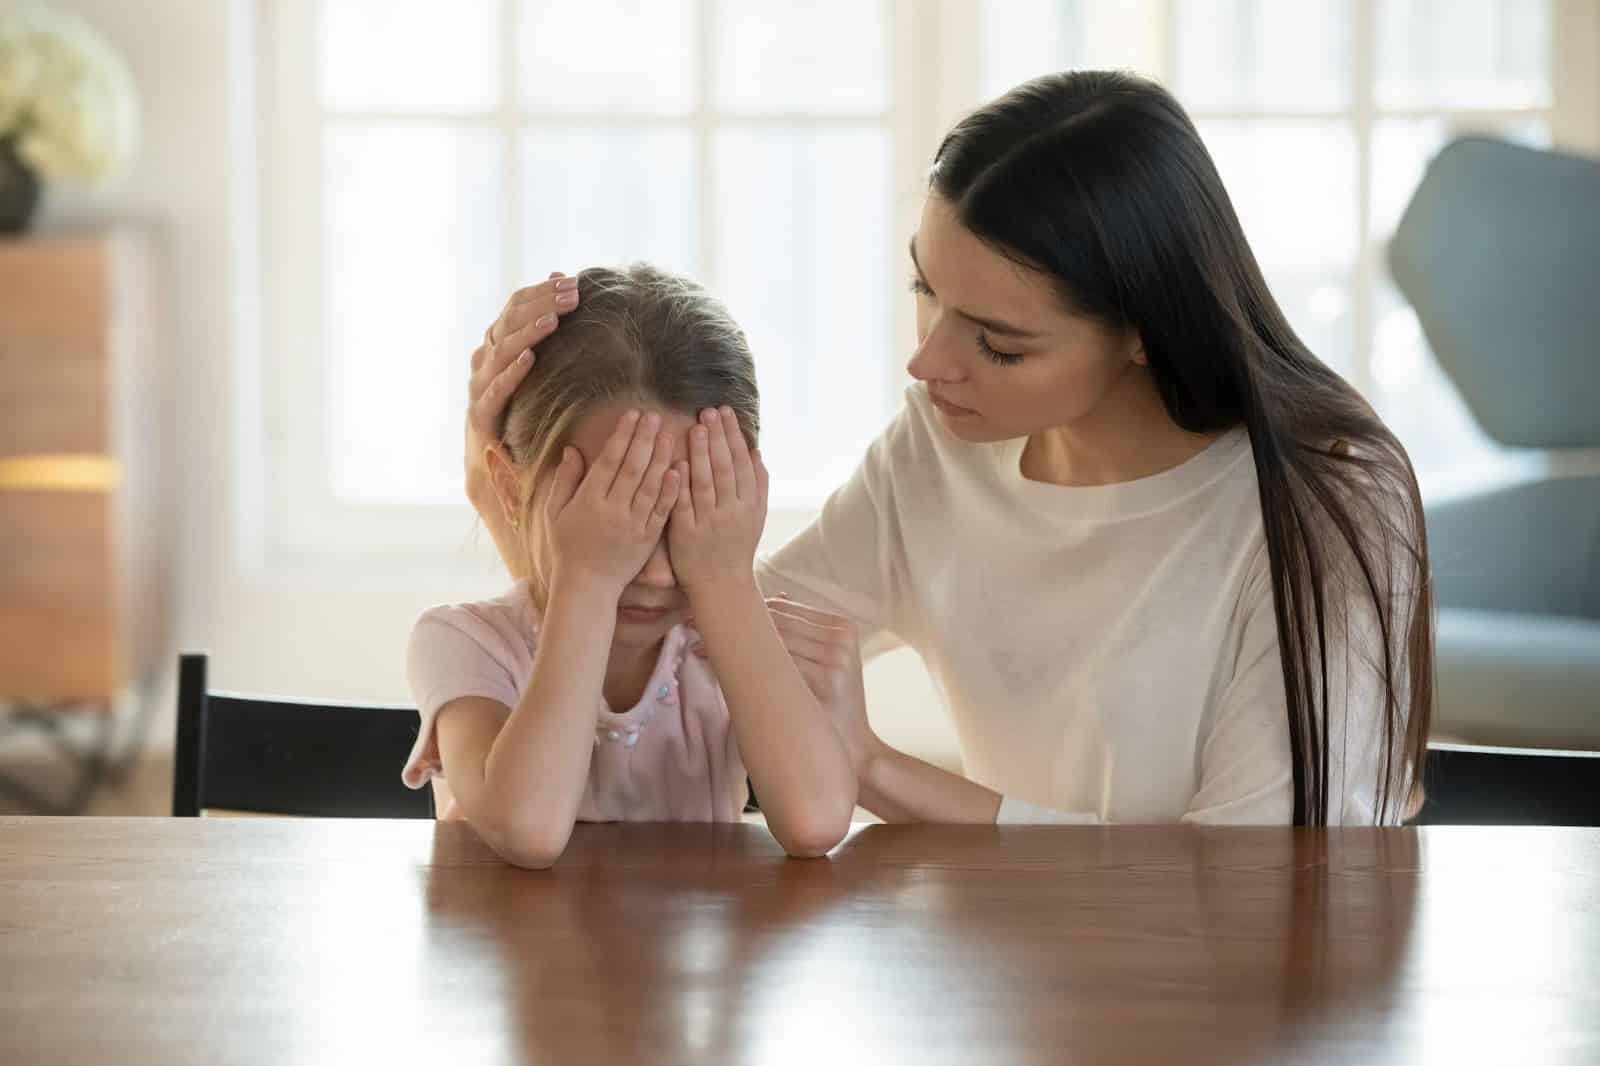 Woman-Comforting-Child | New Direction Family Law